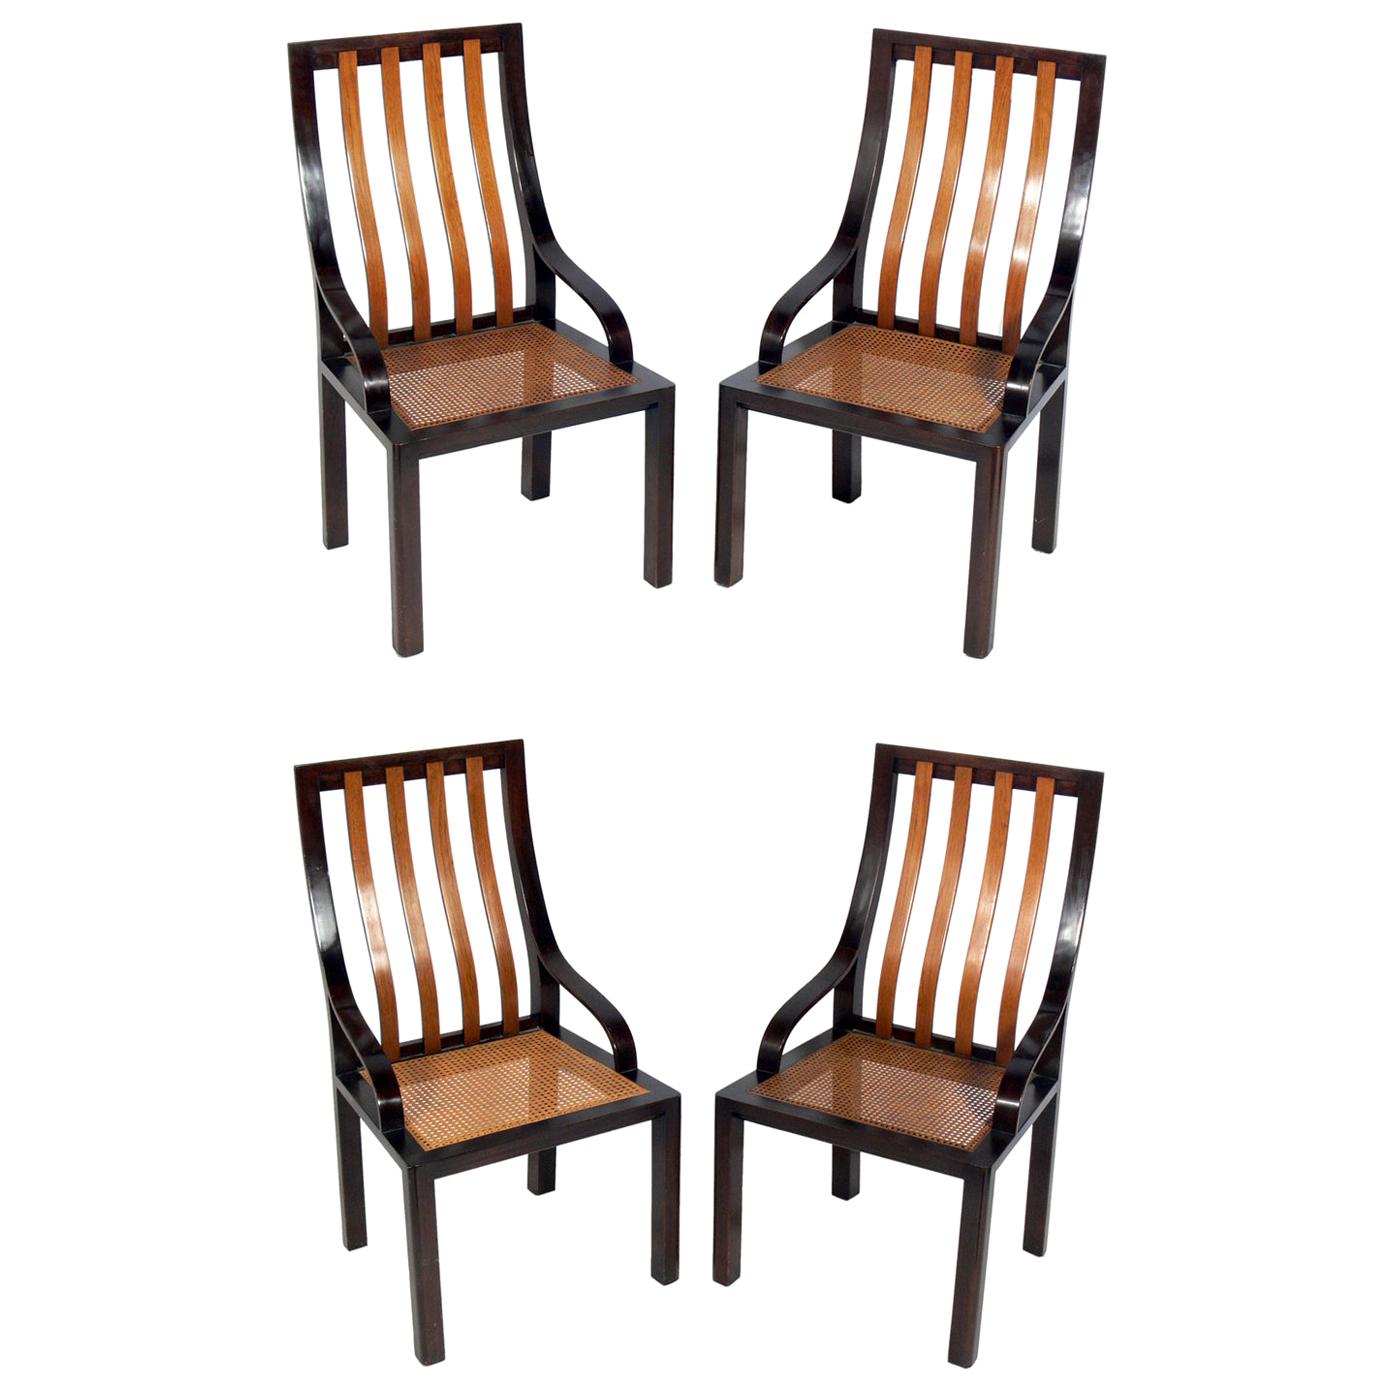 Four Mahogany and Caned Dining Chairs